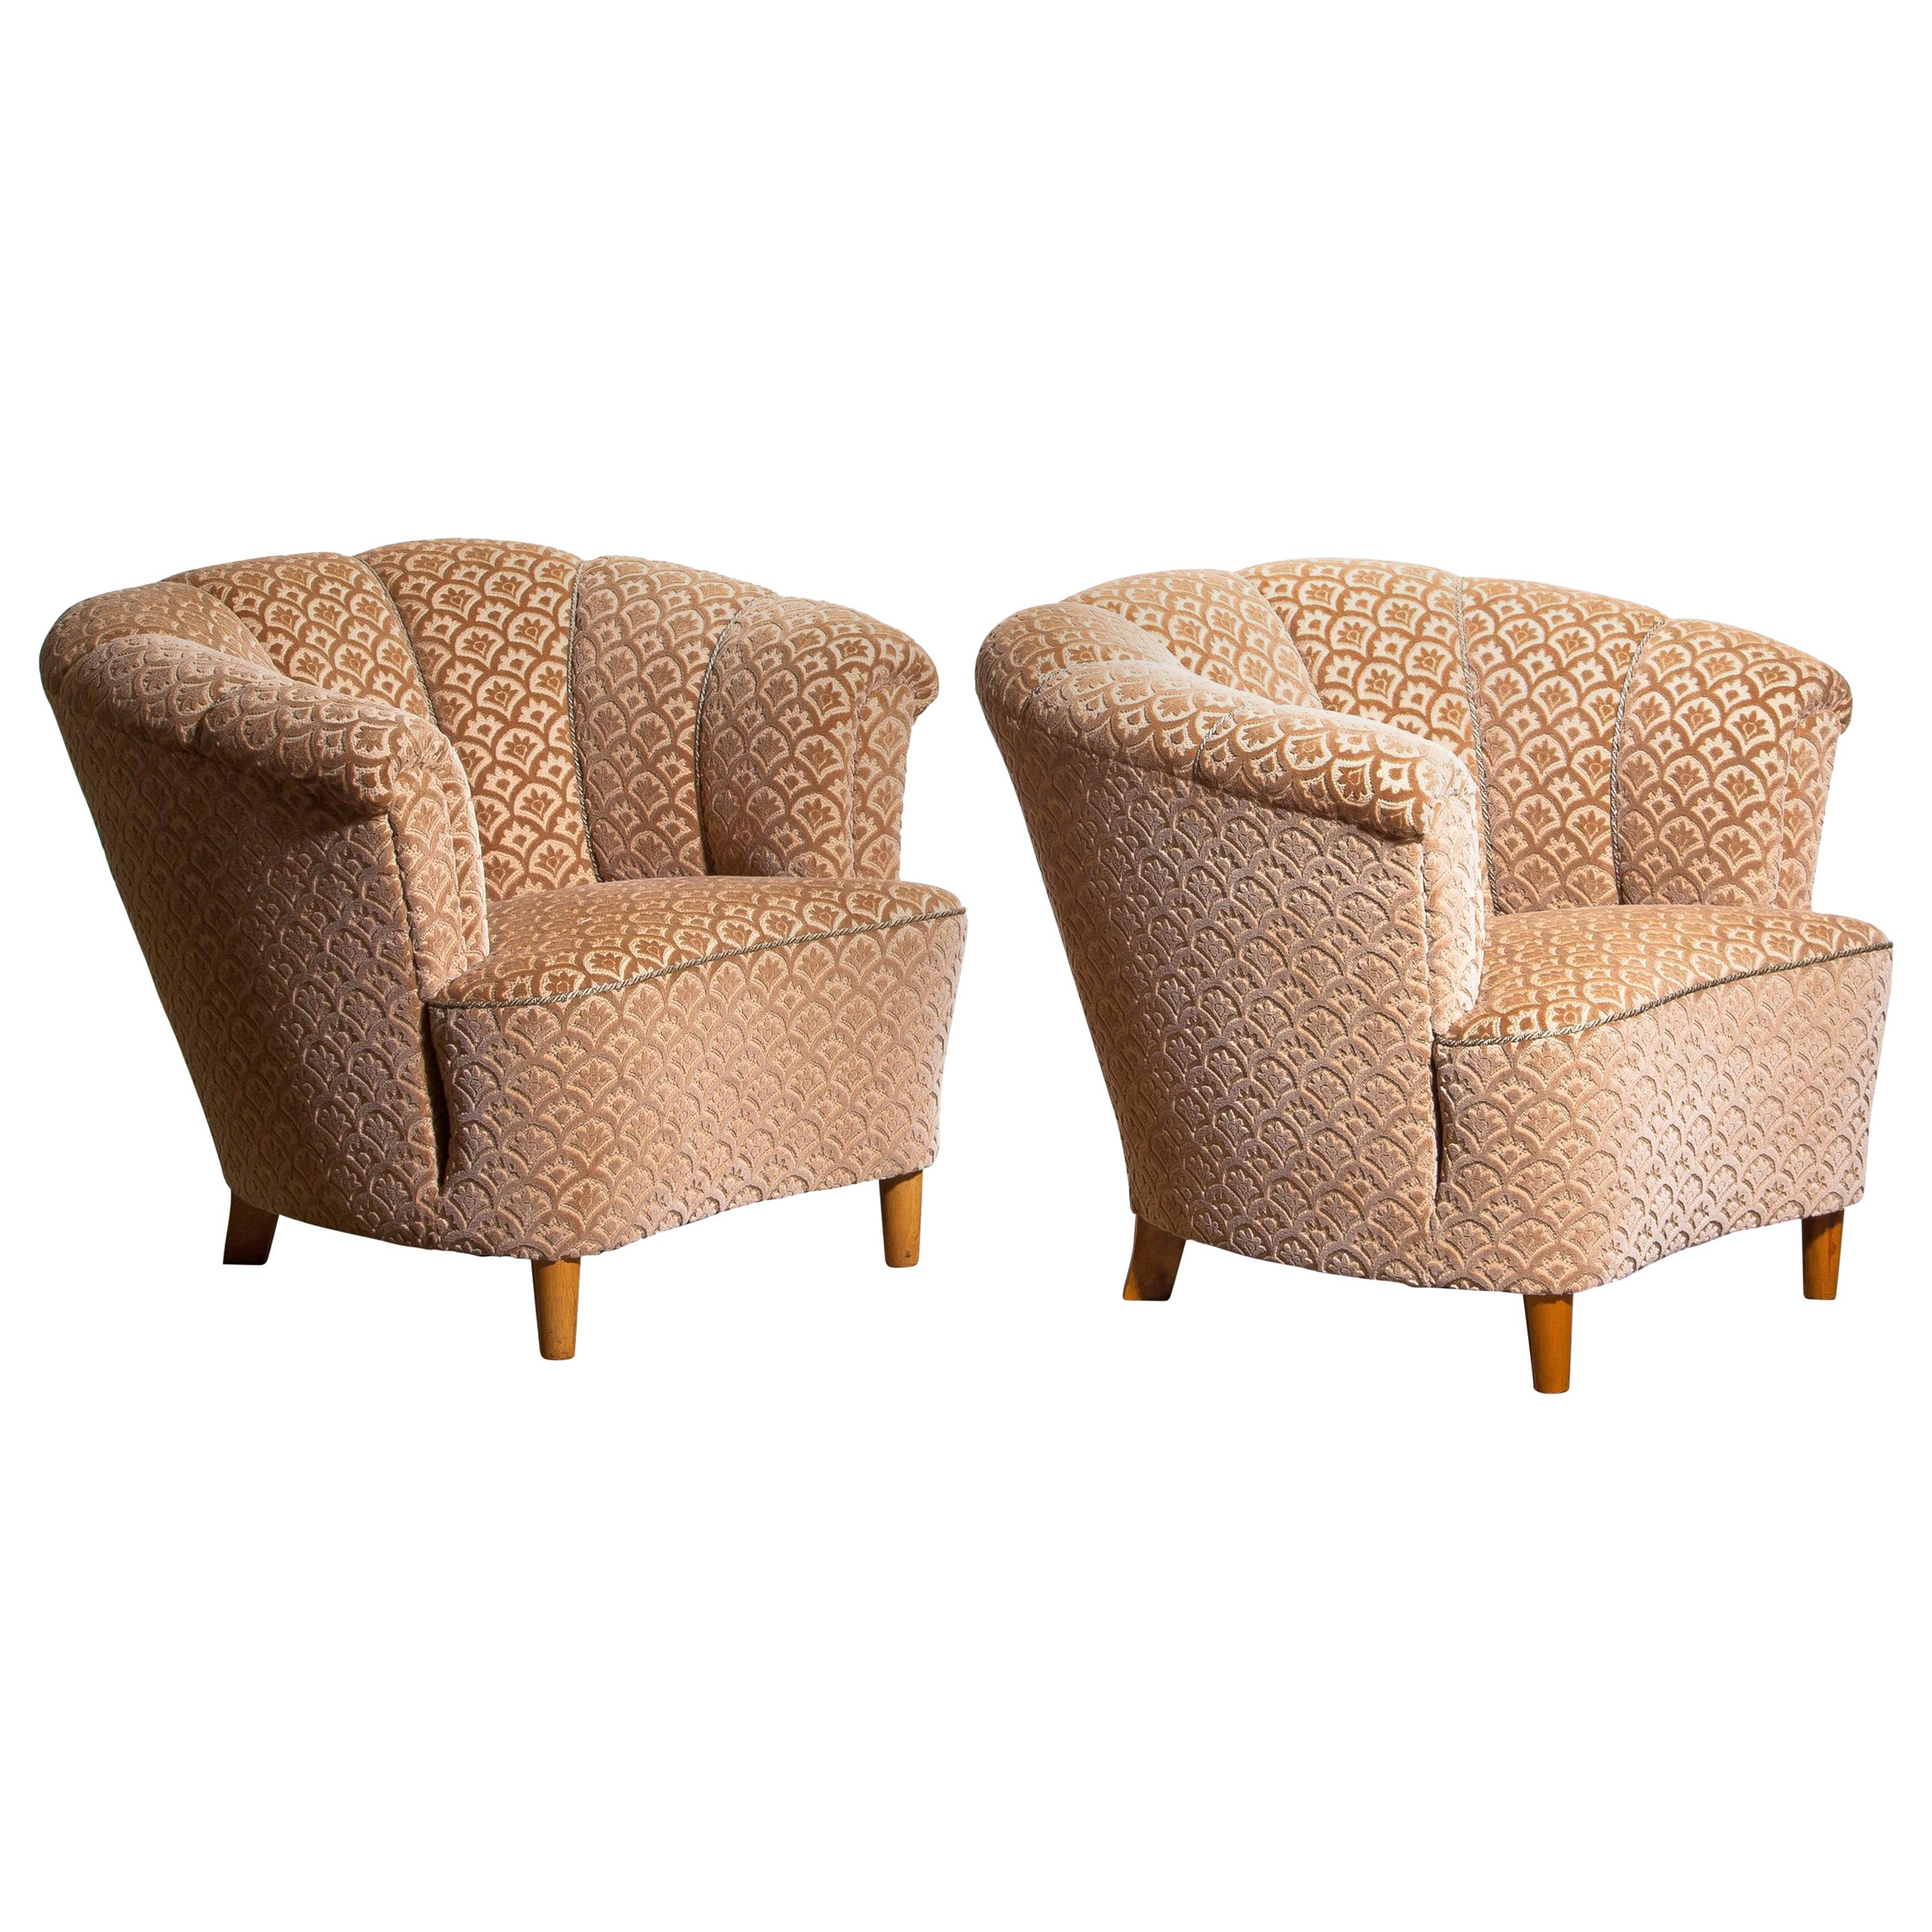 Beautiful set of two comfortable club lounge cocktail chairs from the 1940s.
Both chairs are in original and excellent condition.
The chairs are richly upholstered in flocked velvet and standing on beech legs.
    